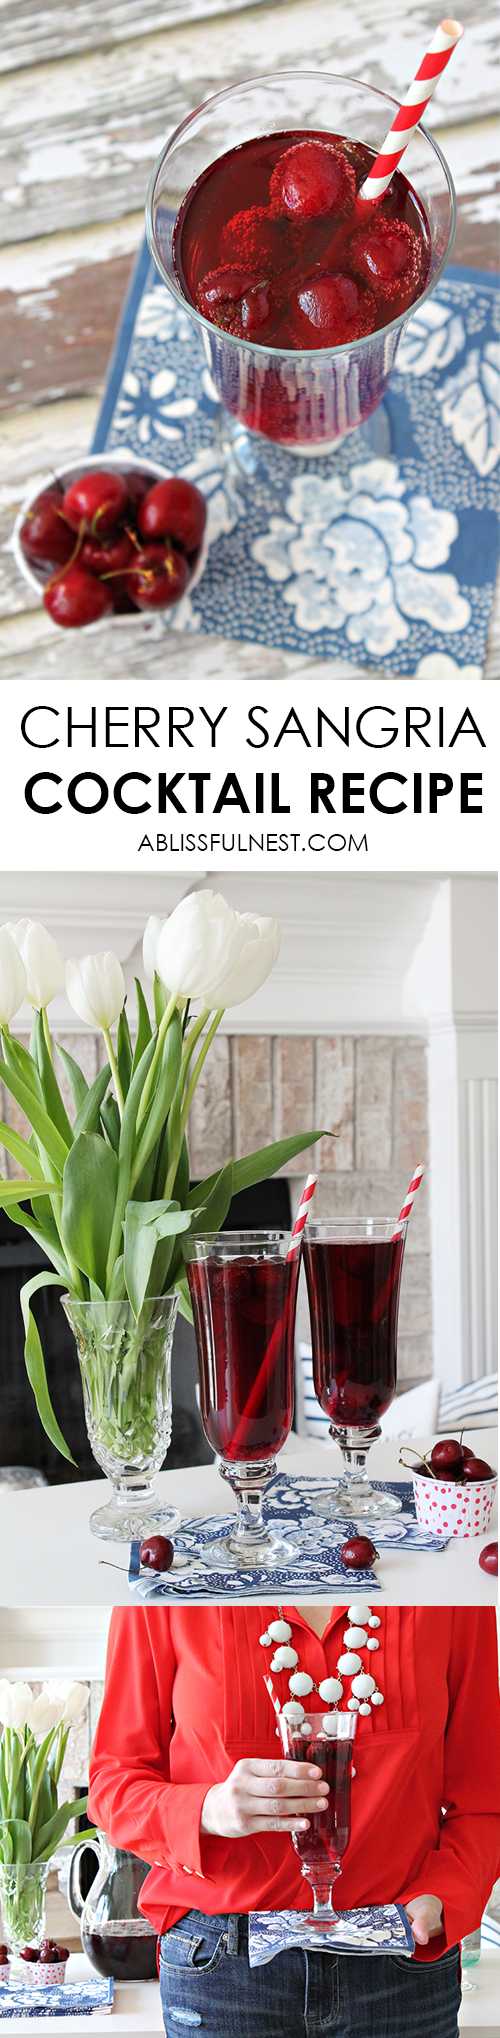 The most delicious and refreshing cherry sangria cocktail recipe! Perfect for your next dinner party with friends. Get the full recipe at ablissfulnest.com